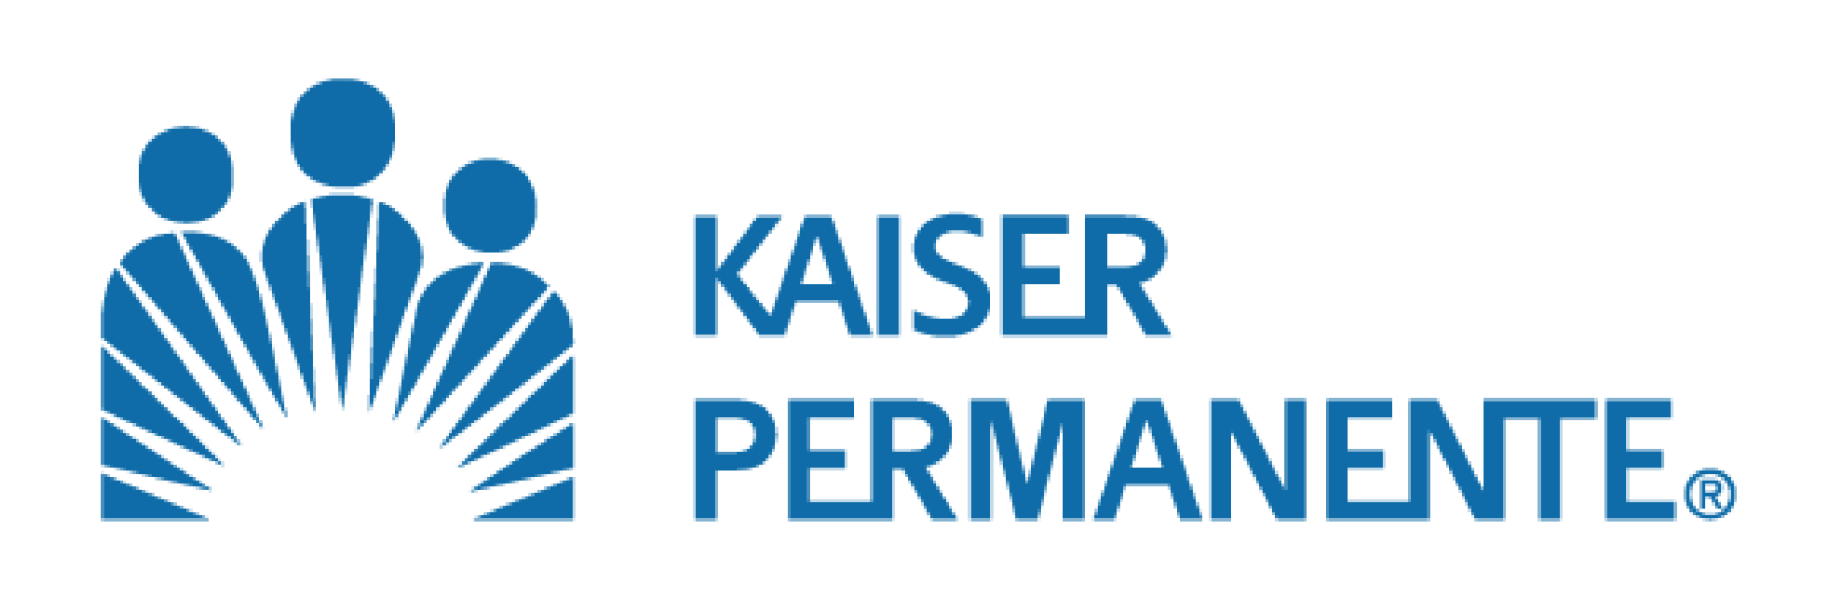 Visit Kaiser Permanente's website by clicking the logo